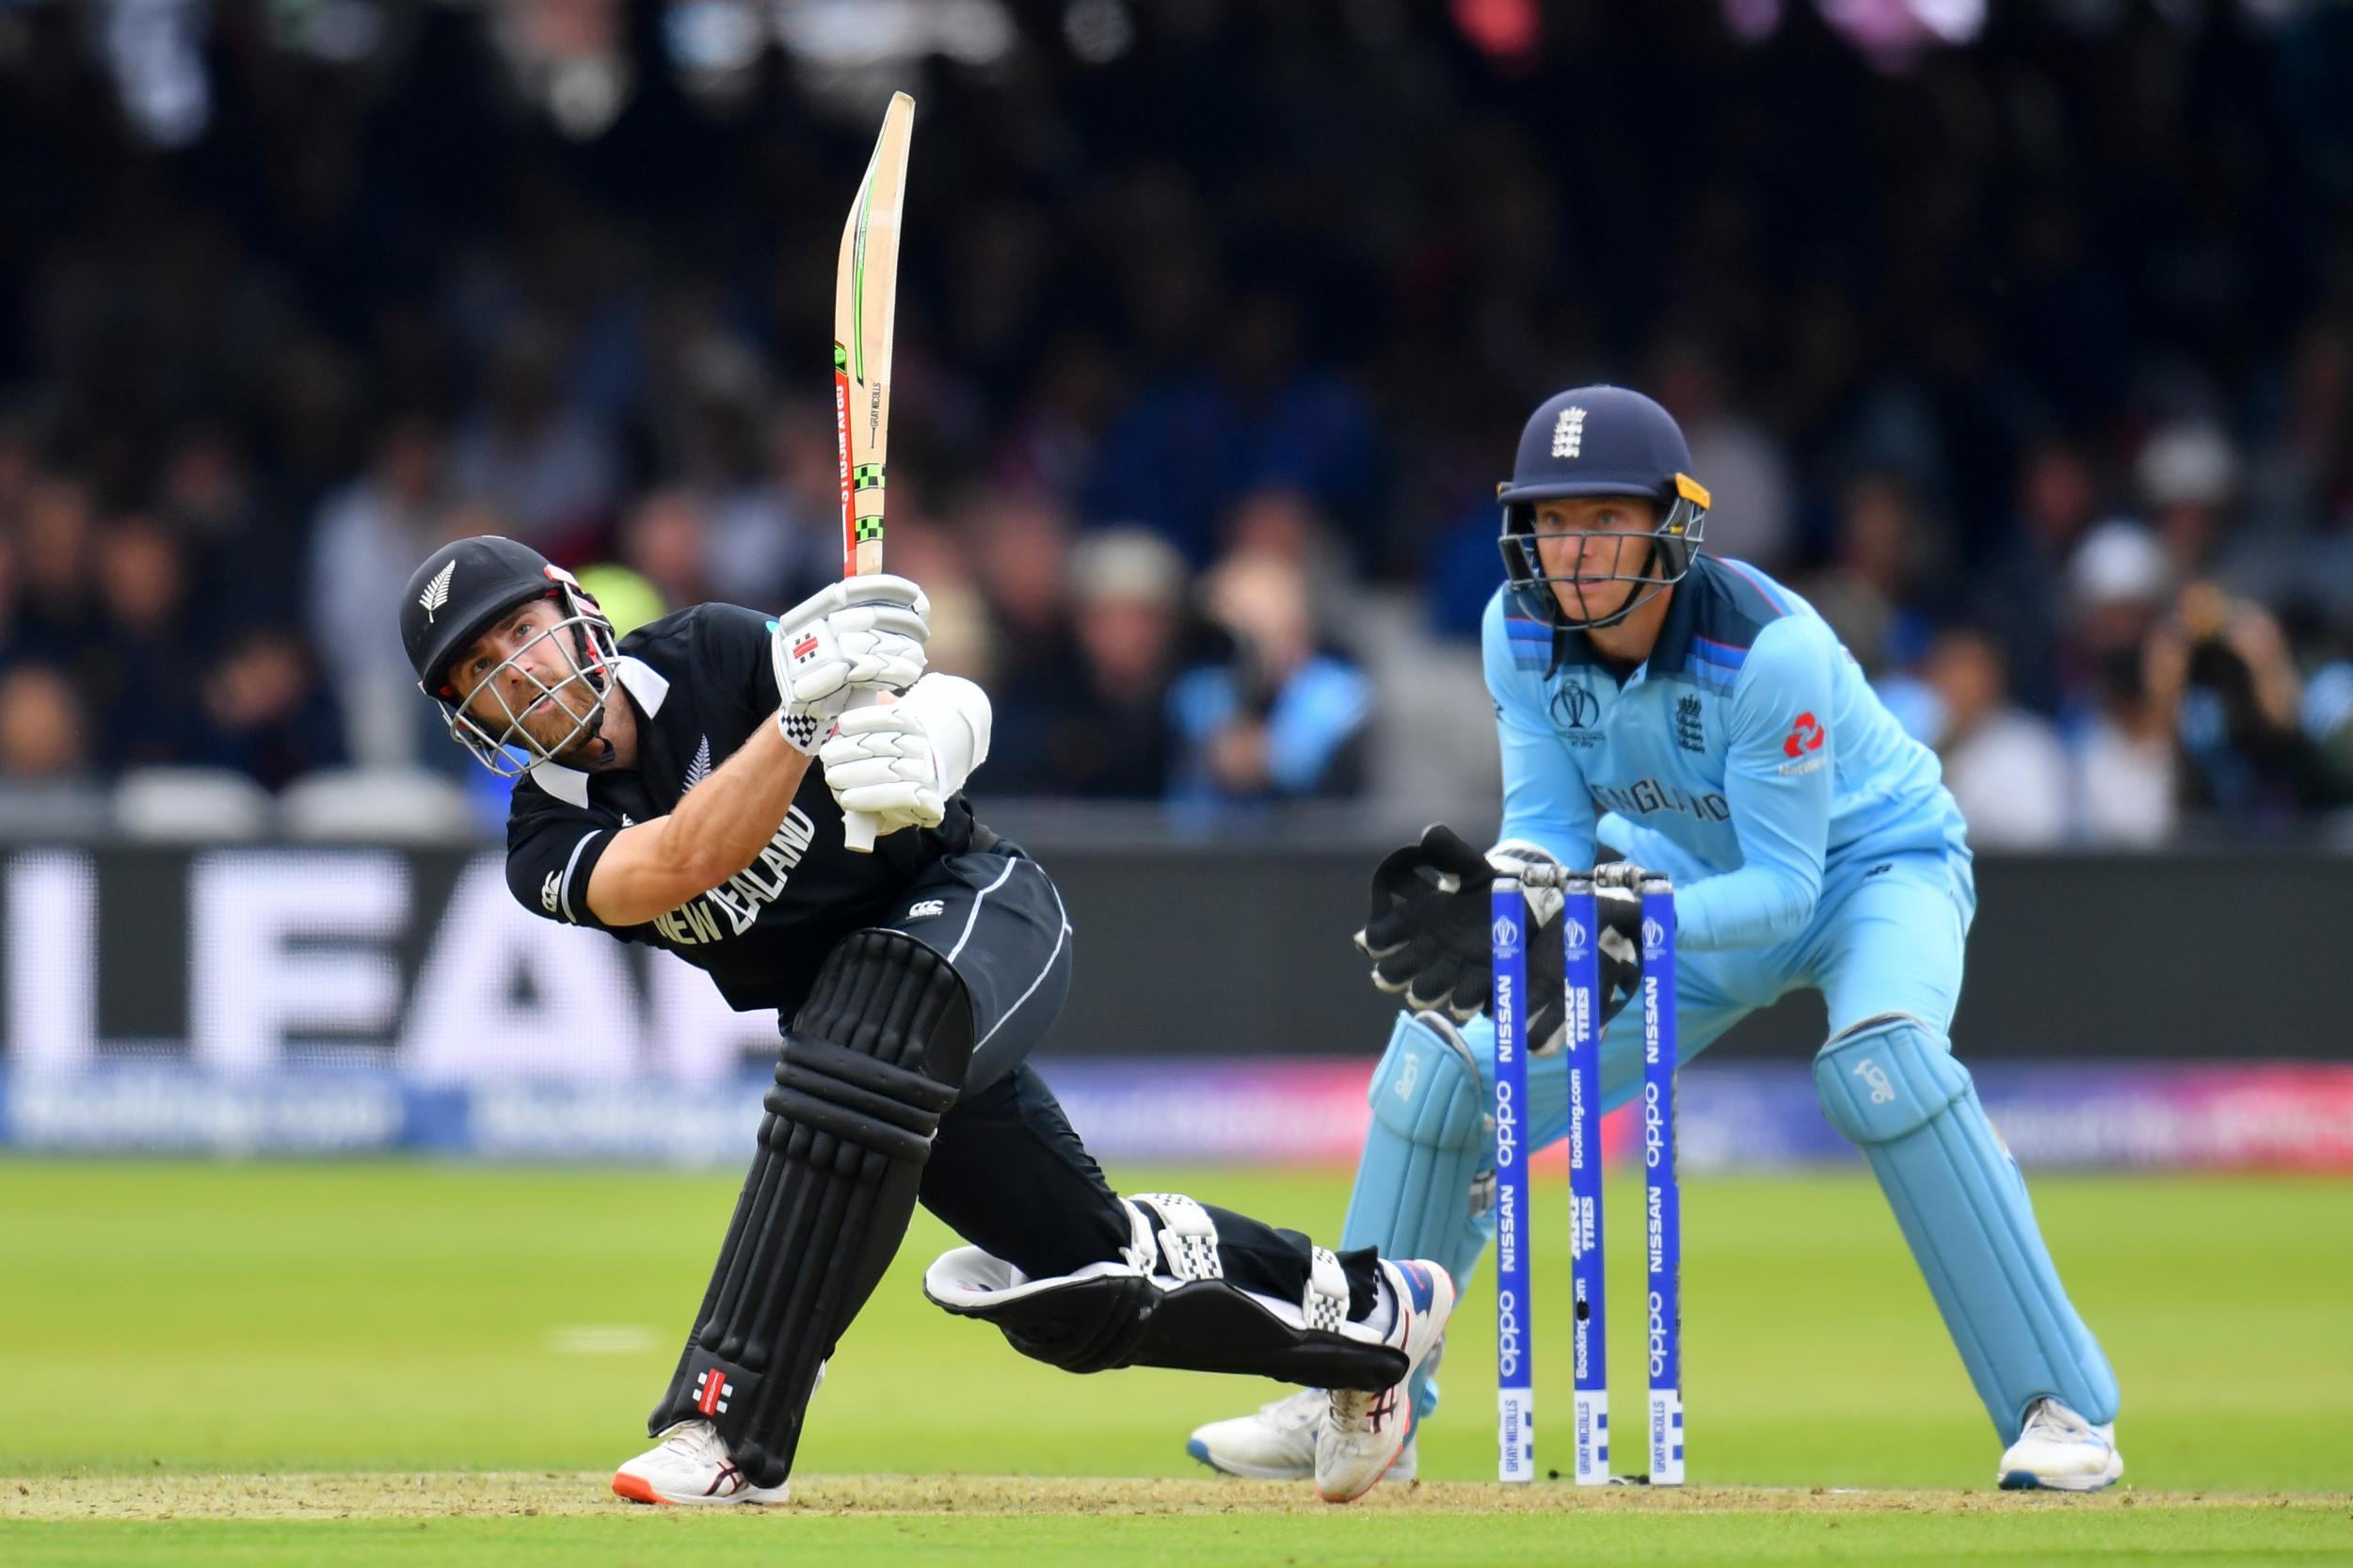 England Vs New Zealand World Cup Final 2019 Live Latest Free Download